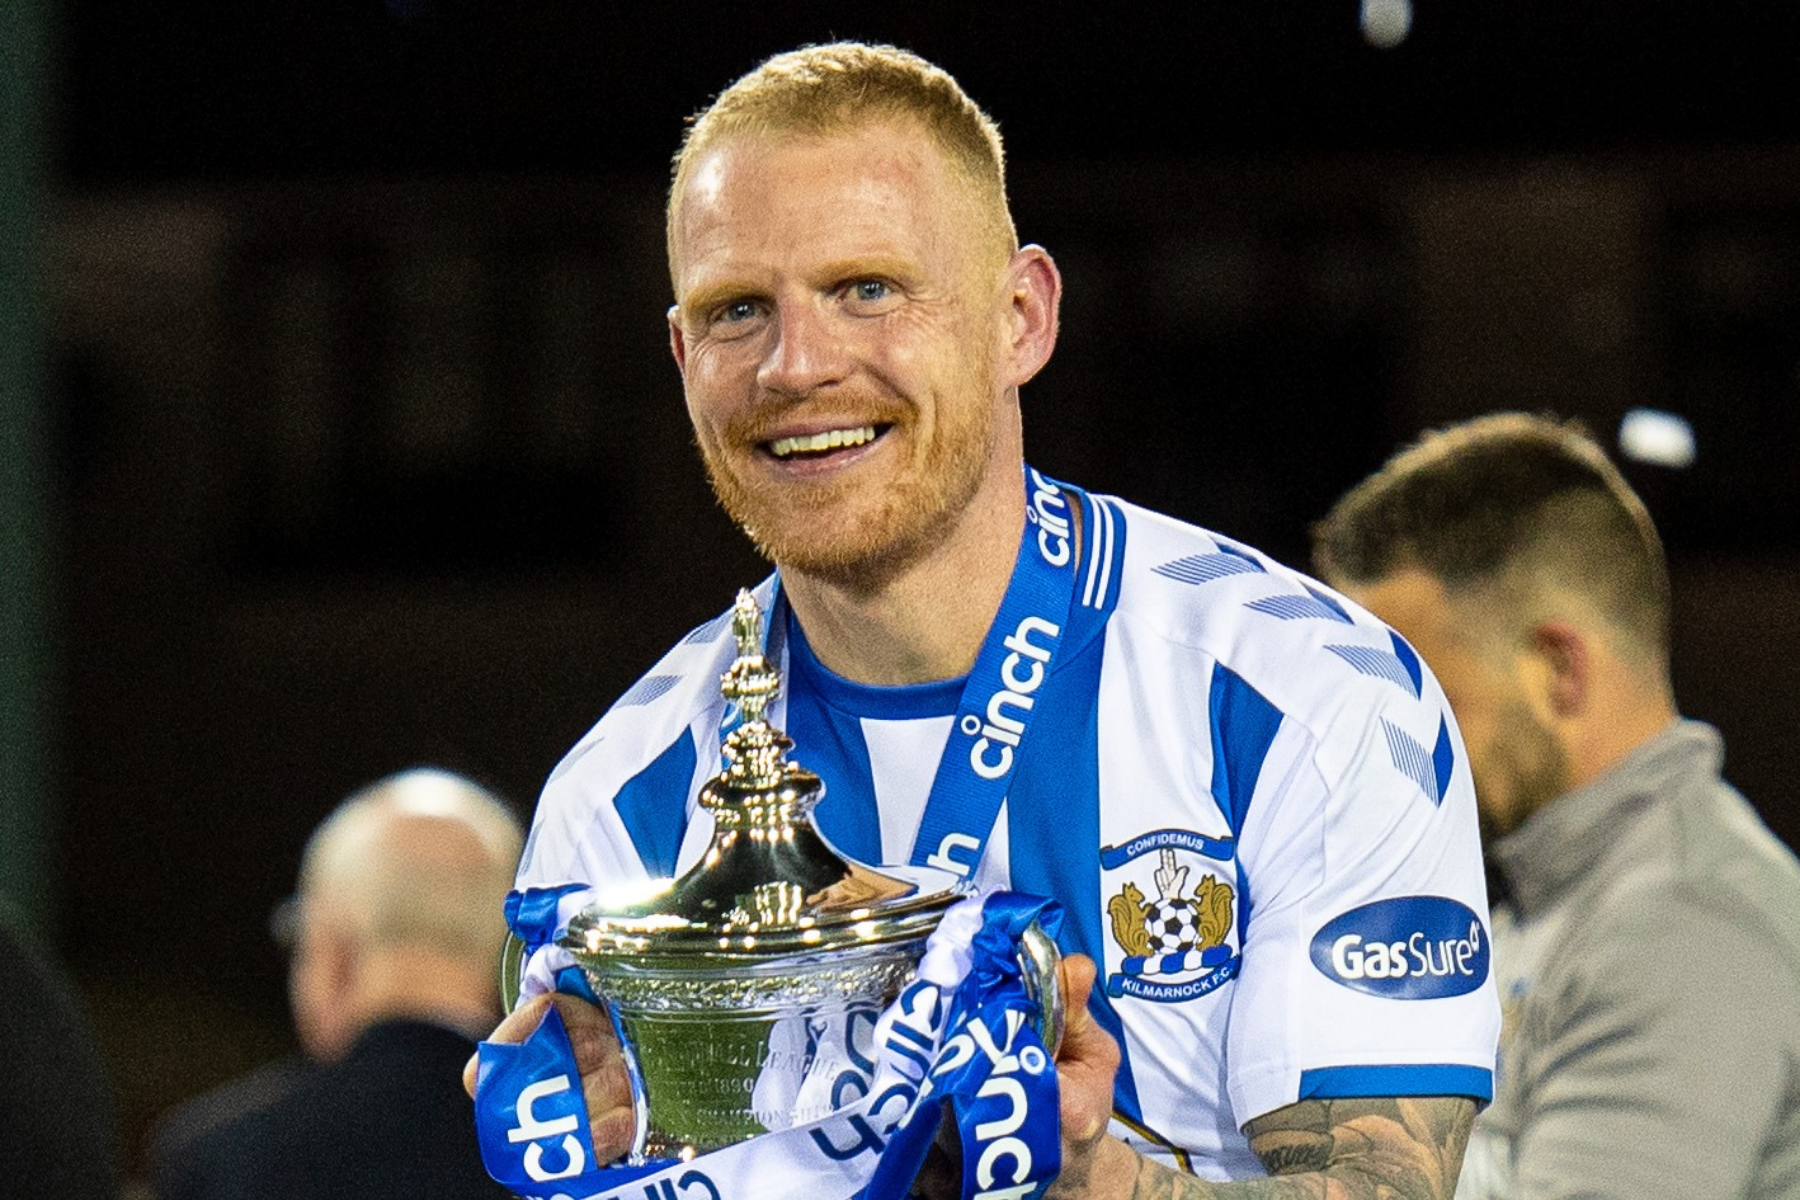 Chris Burke leaves Kilmarnock in bid for first-team football after coaching role offer